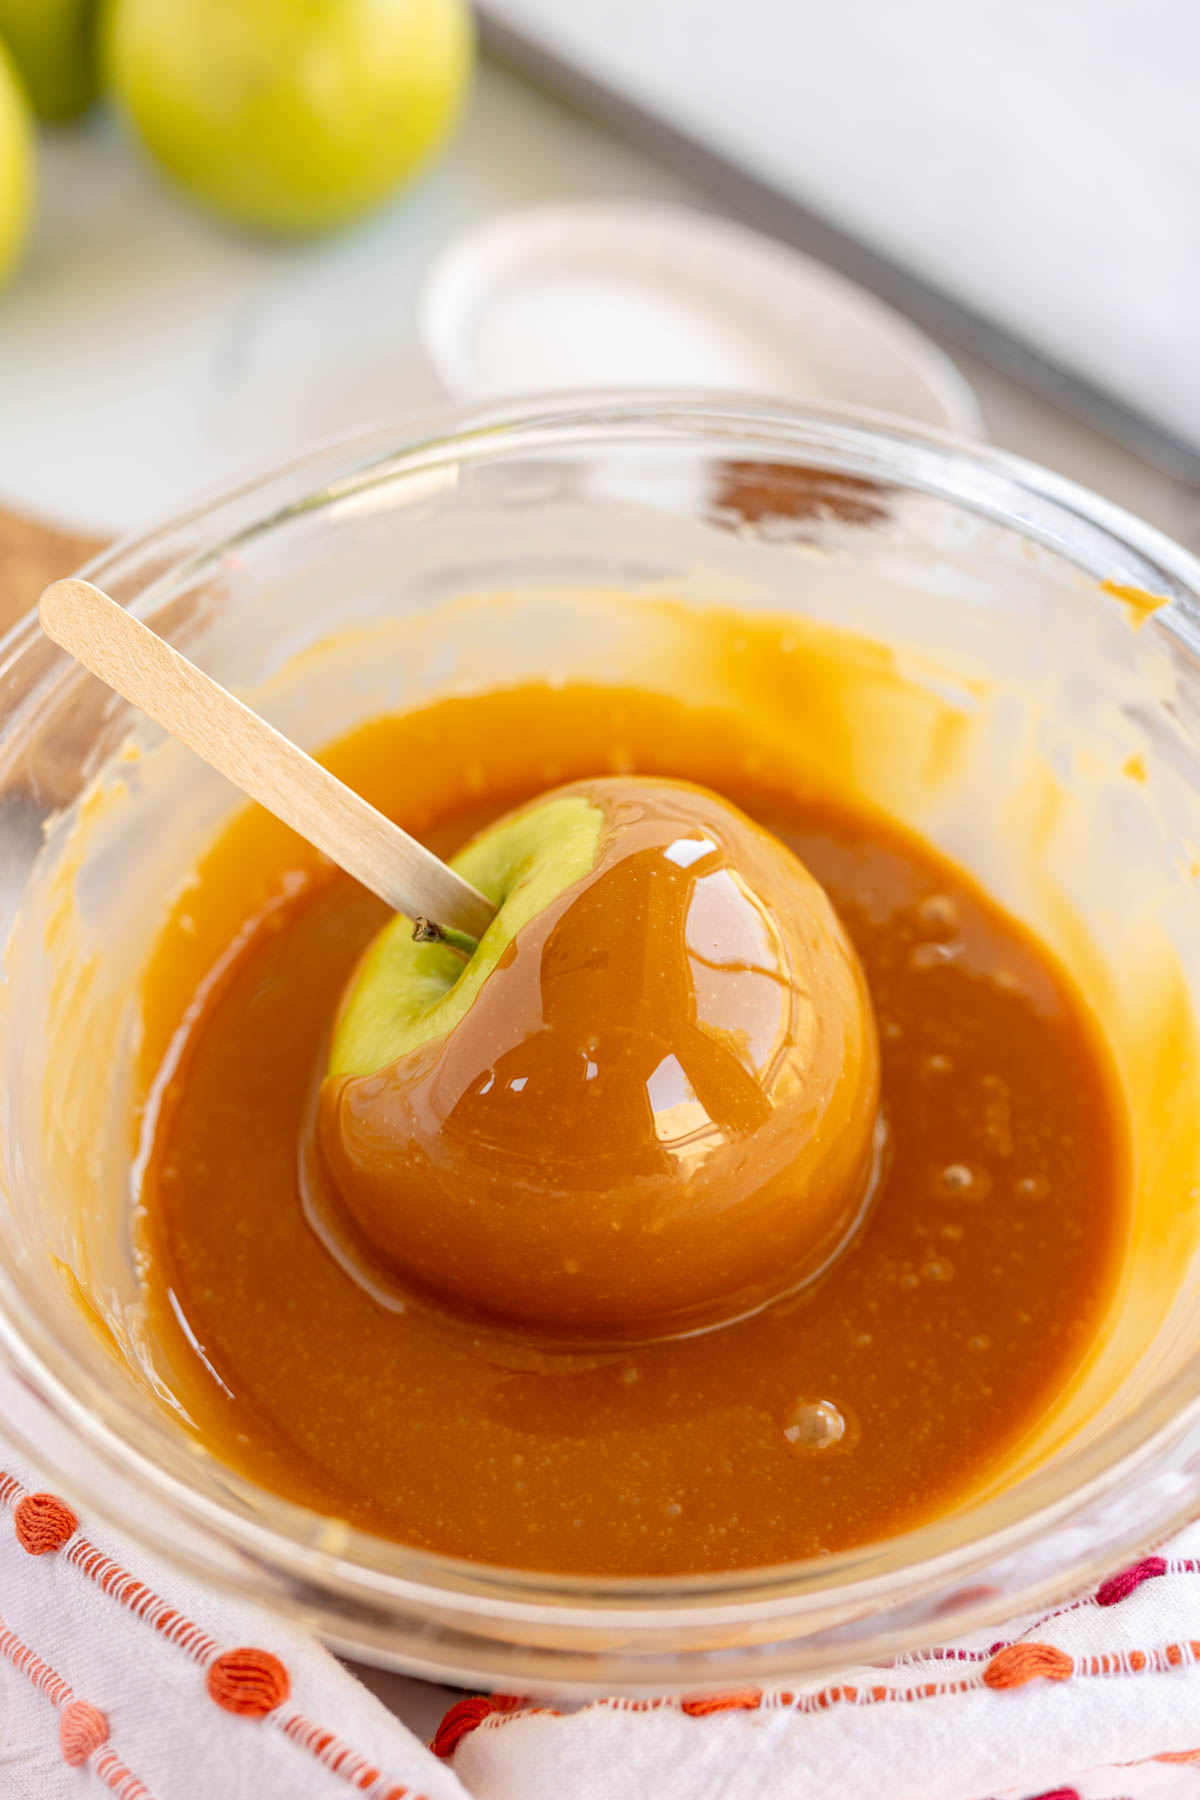 dipping a green apple into a bowl of caramel